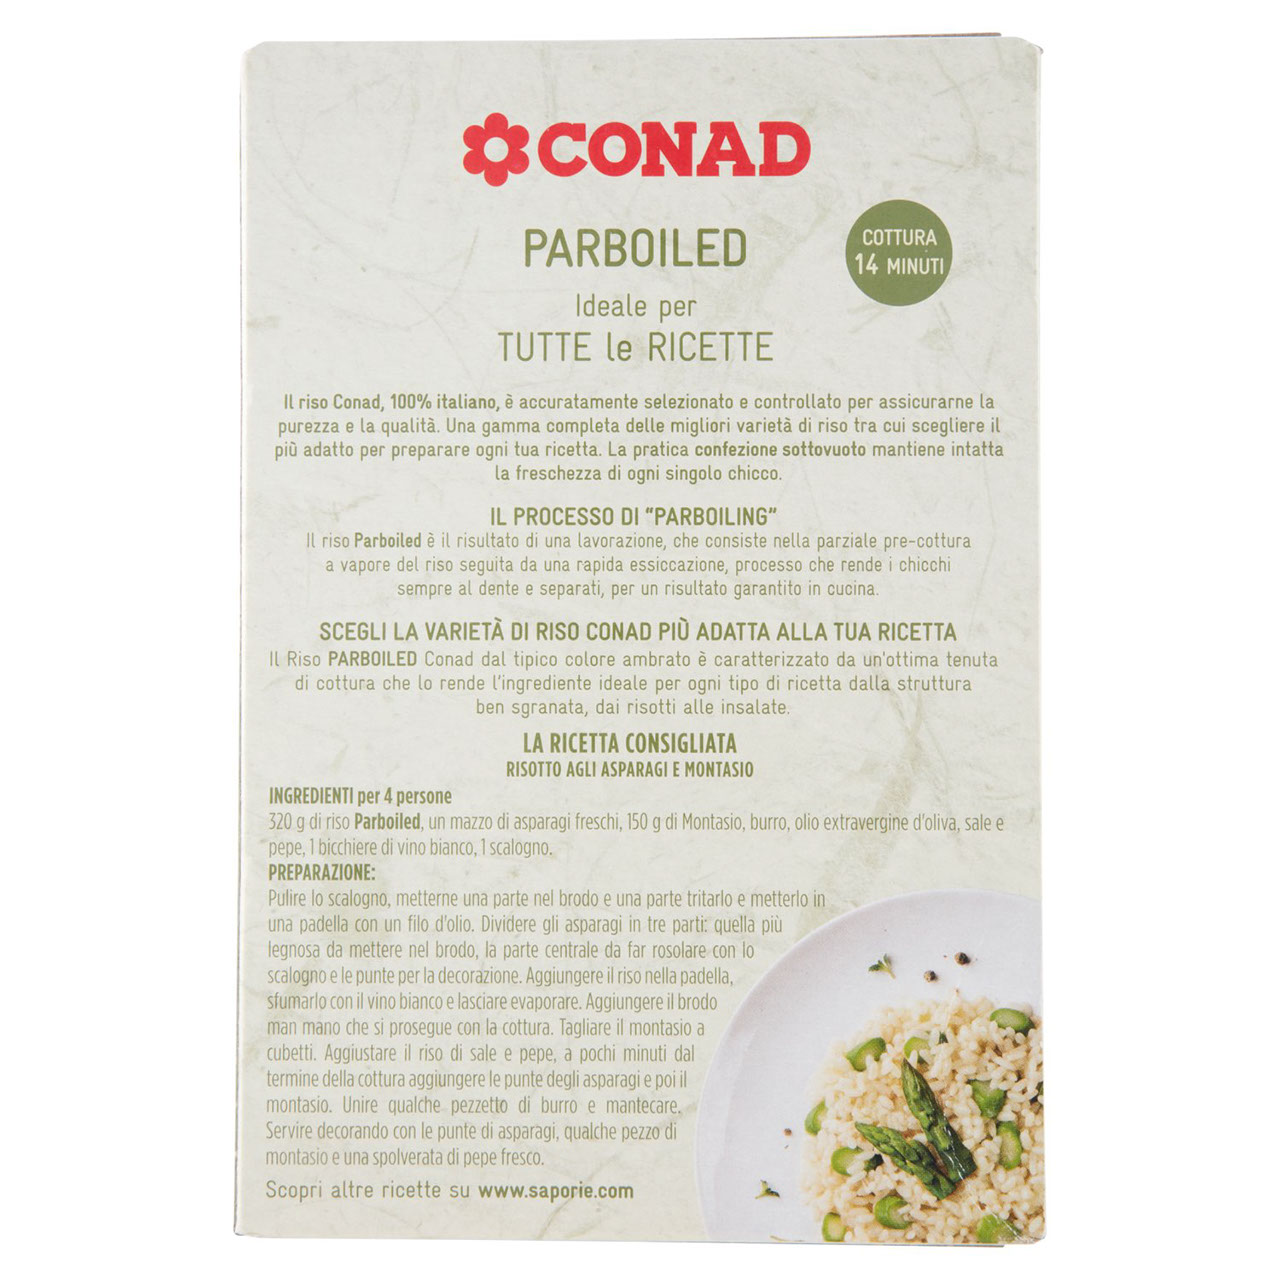 https://spesaonline.conad.it/assets/products/conad-parboiled-1-kg--203741/Parte-posteriore-planogramma.jpeg/renditions/cq5dam.web.1280.1280.jpeg